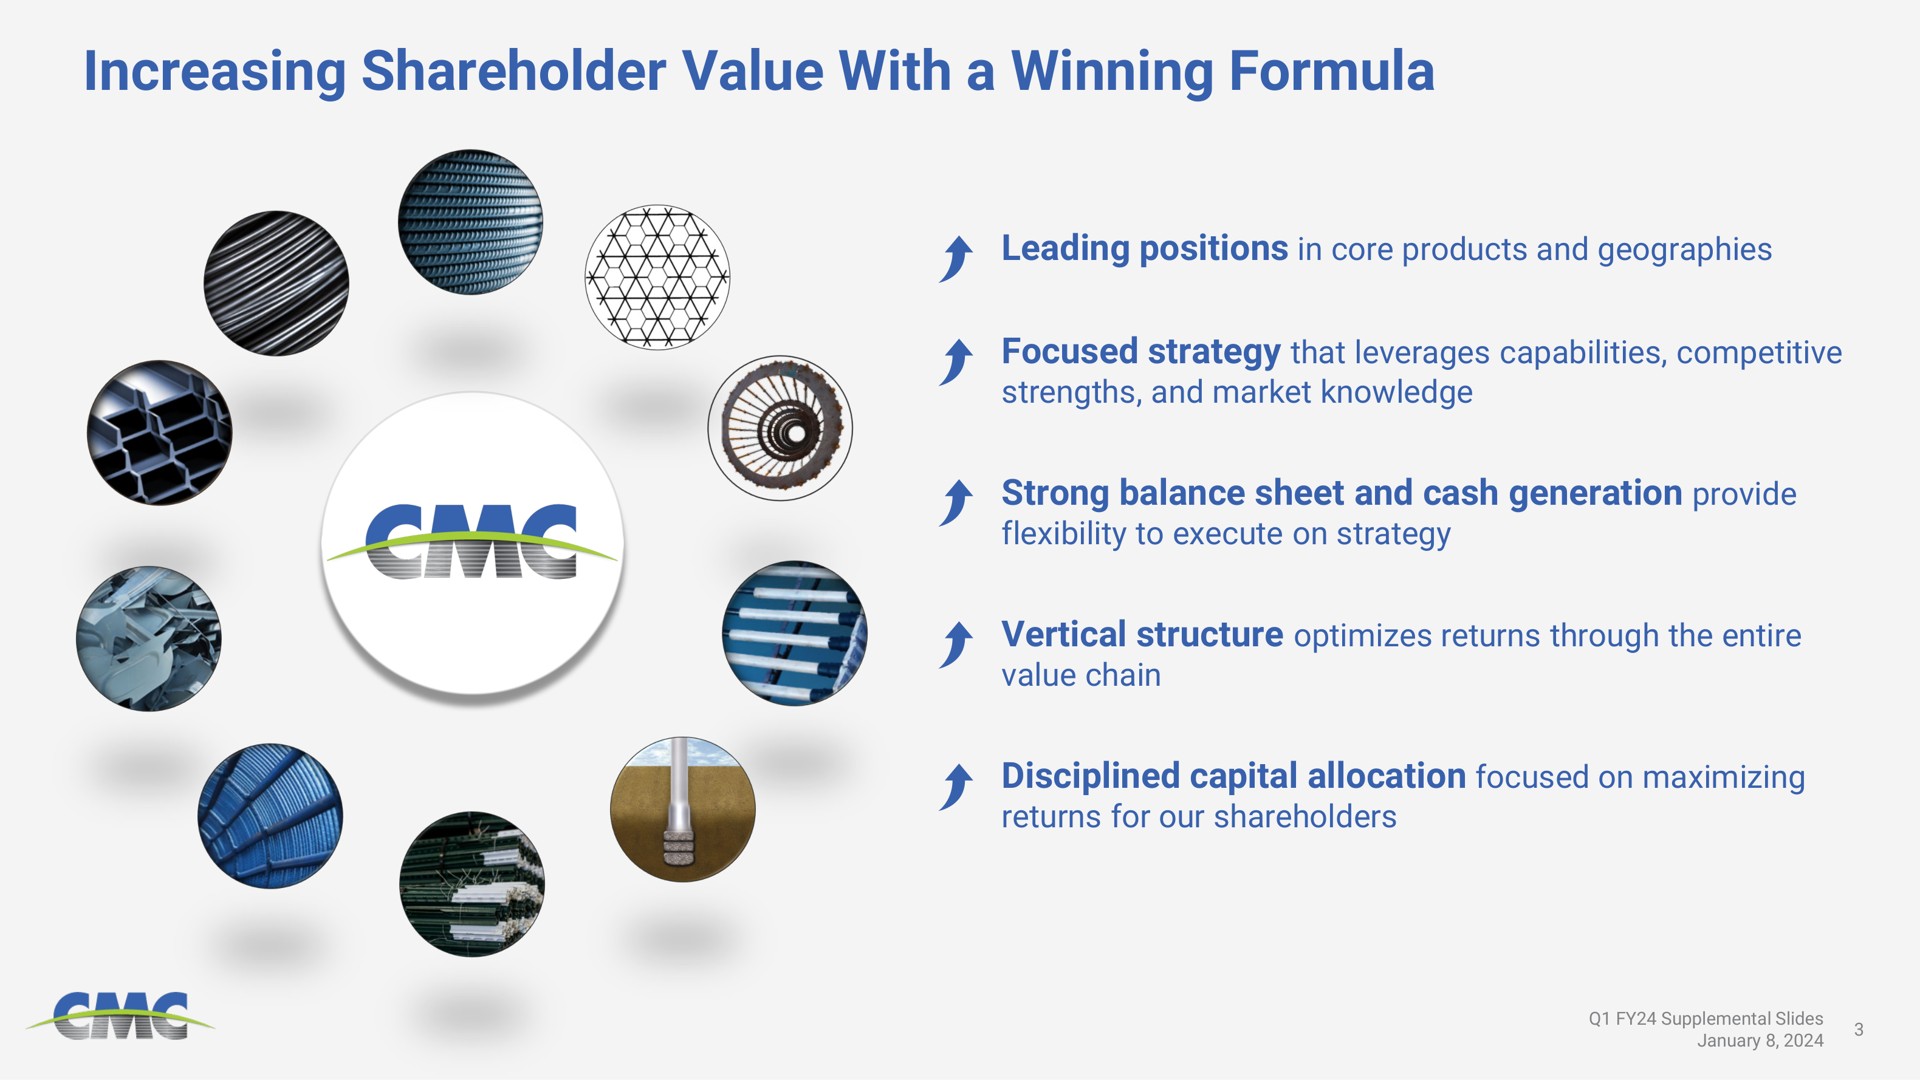 increasing shareholder value with a winning formula leading positions in core products and geographies focused strategy that leverages capabilities competitive strengths and market knowledge strong balance sheet and cash generation provide flexibility to execute on strategy vertical structure optimizes returns through the entire value chain disciplined capital allocation focused on maximizing returns for our shareholders | Commercial Metals Company